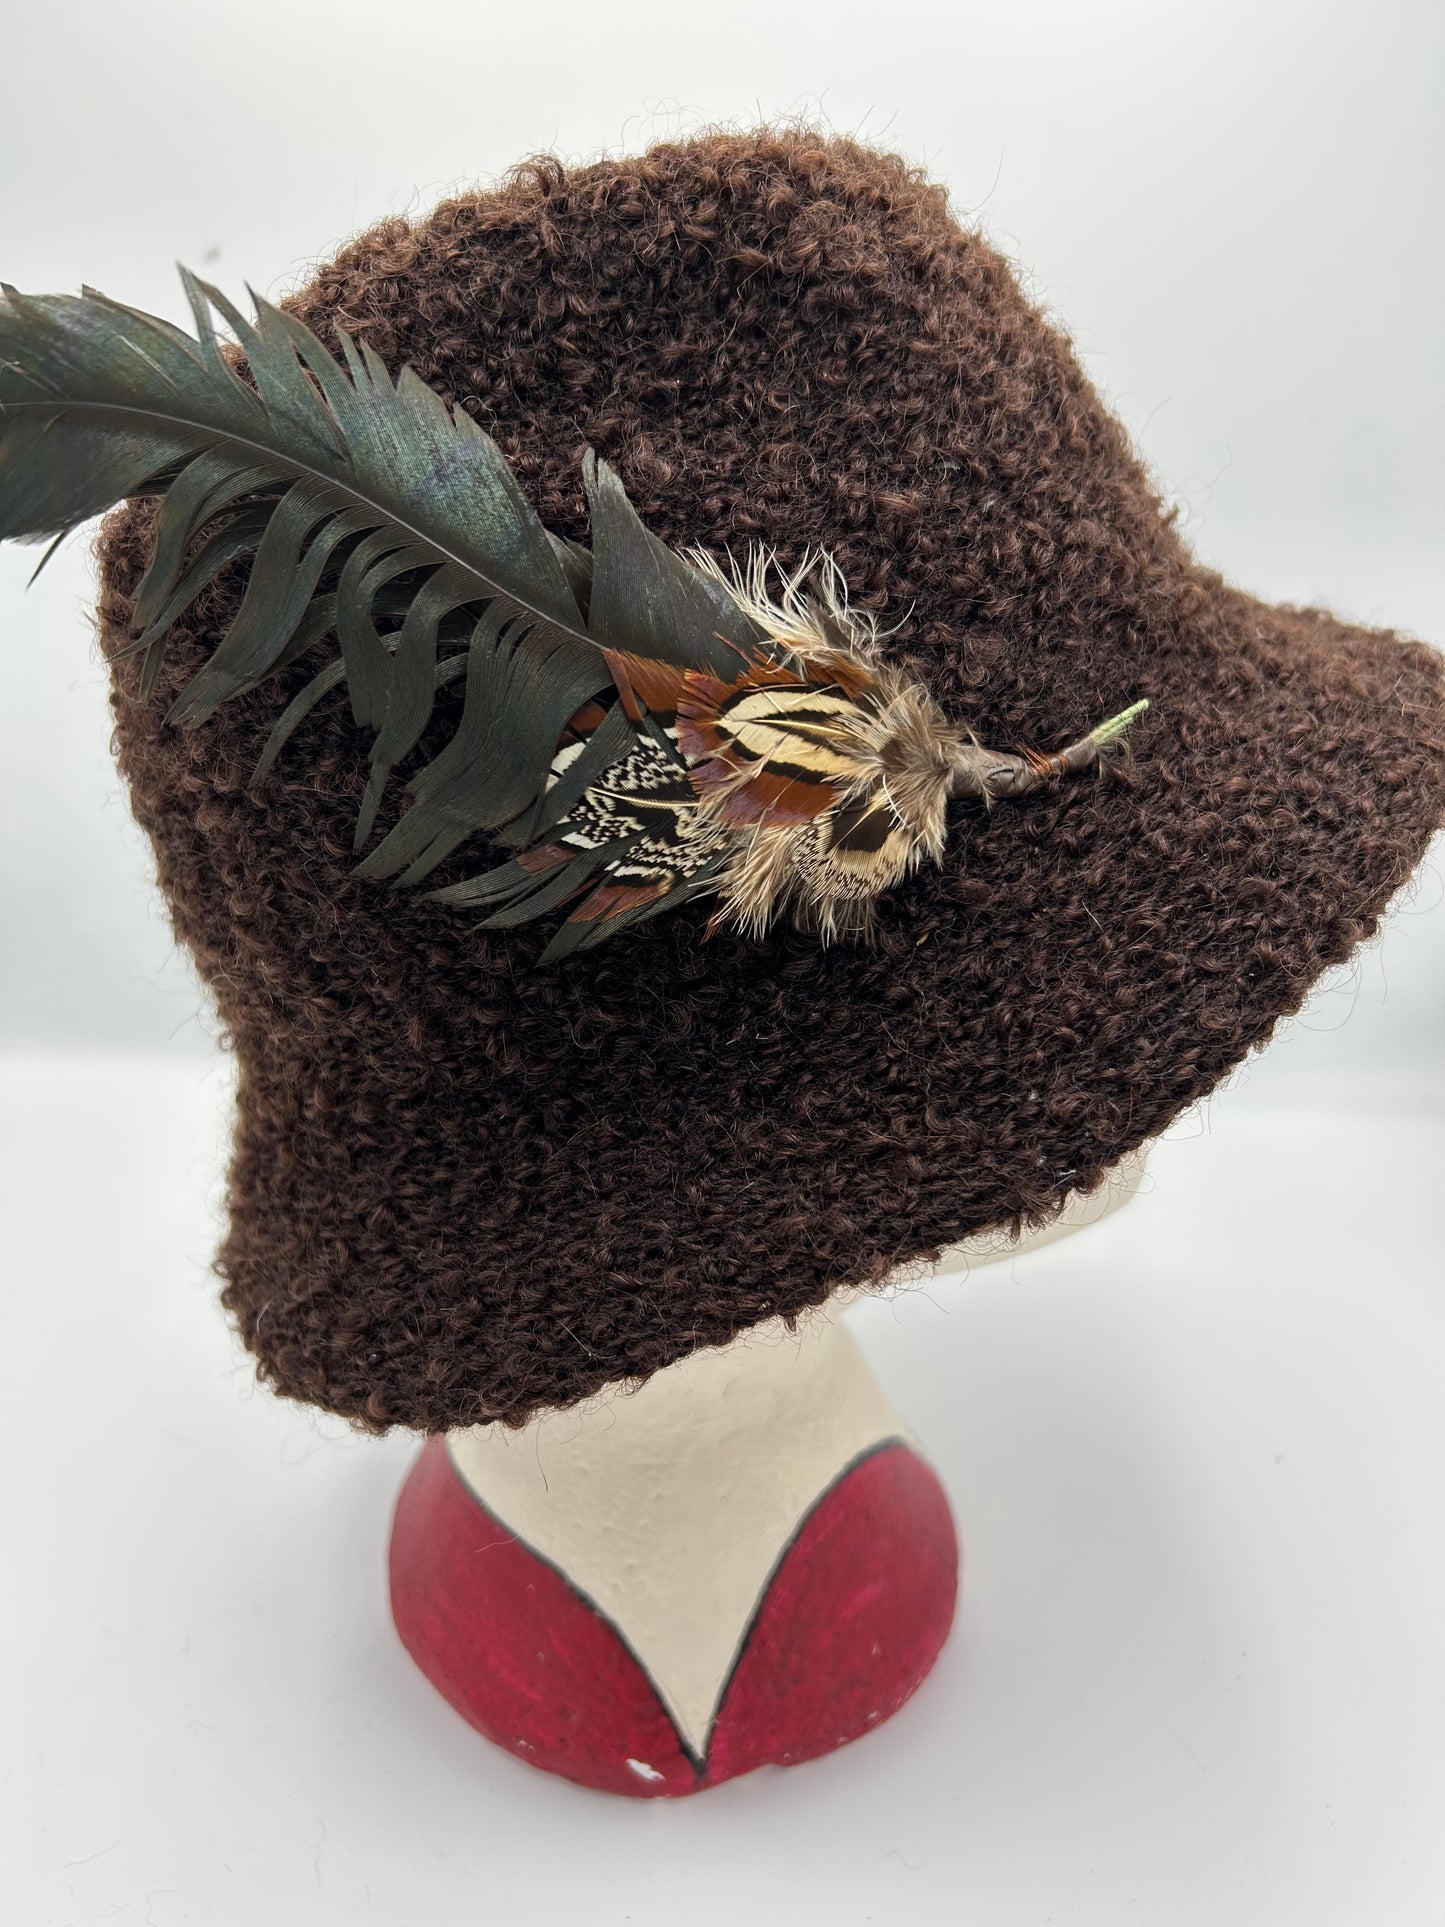 Vintage 1970s Chocolate Brown Boucle Wool Pheasant Feather Trilby Style Hat